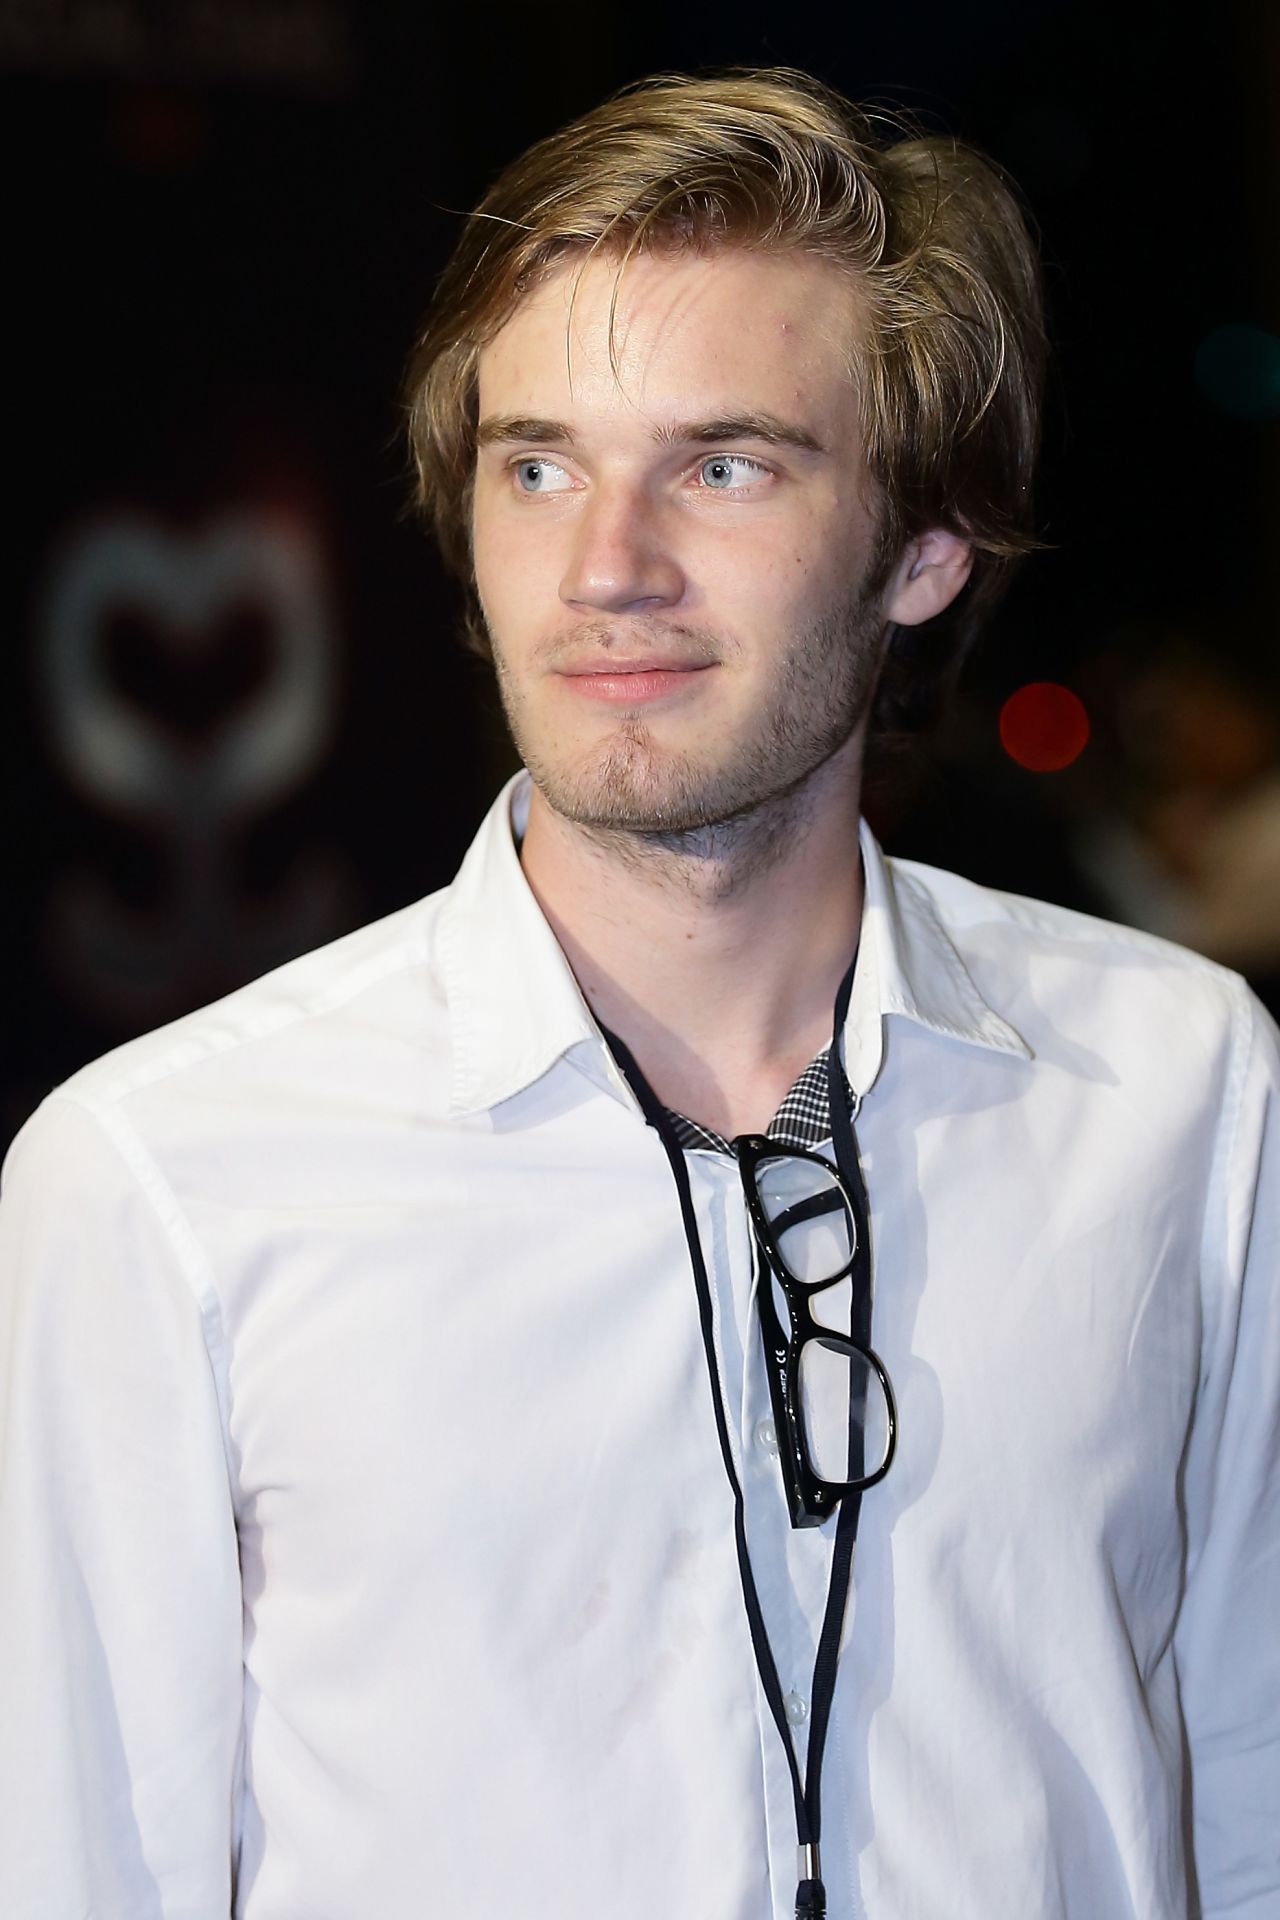 PewDiePie is undoubtedly the king of the vlogosphere and his channel has been watched over eight billion times. That's more than one view for every person on Earth. His niche and passion is gaming.